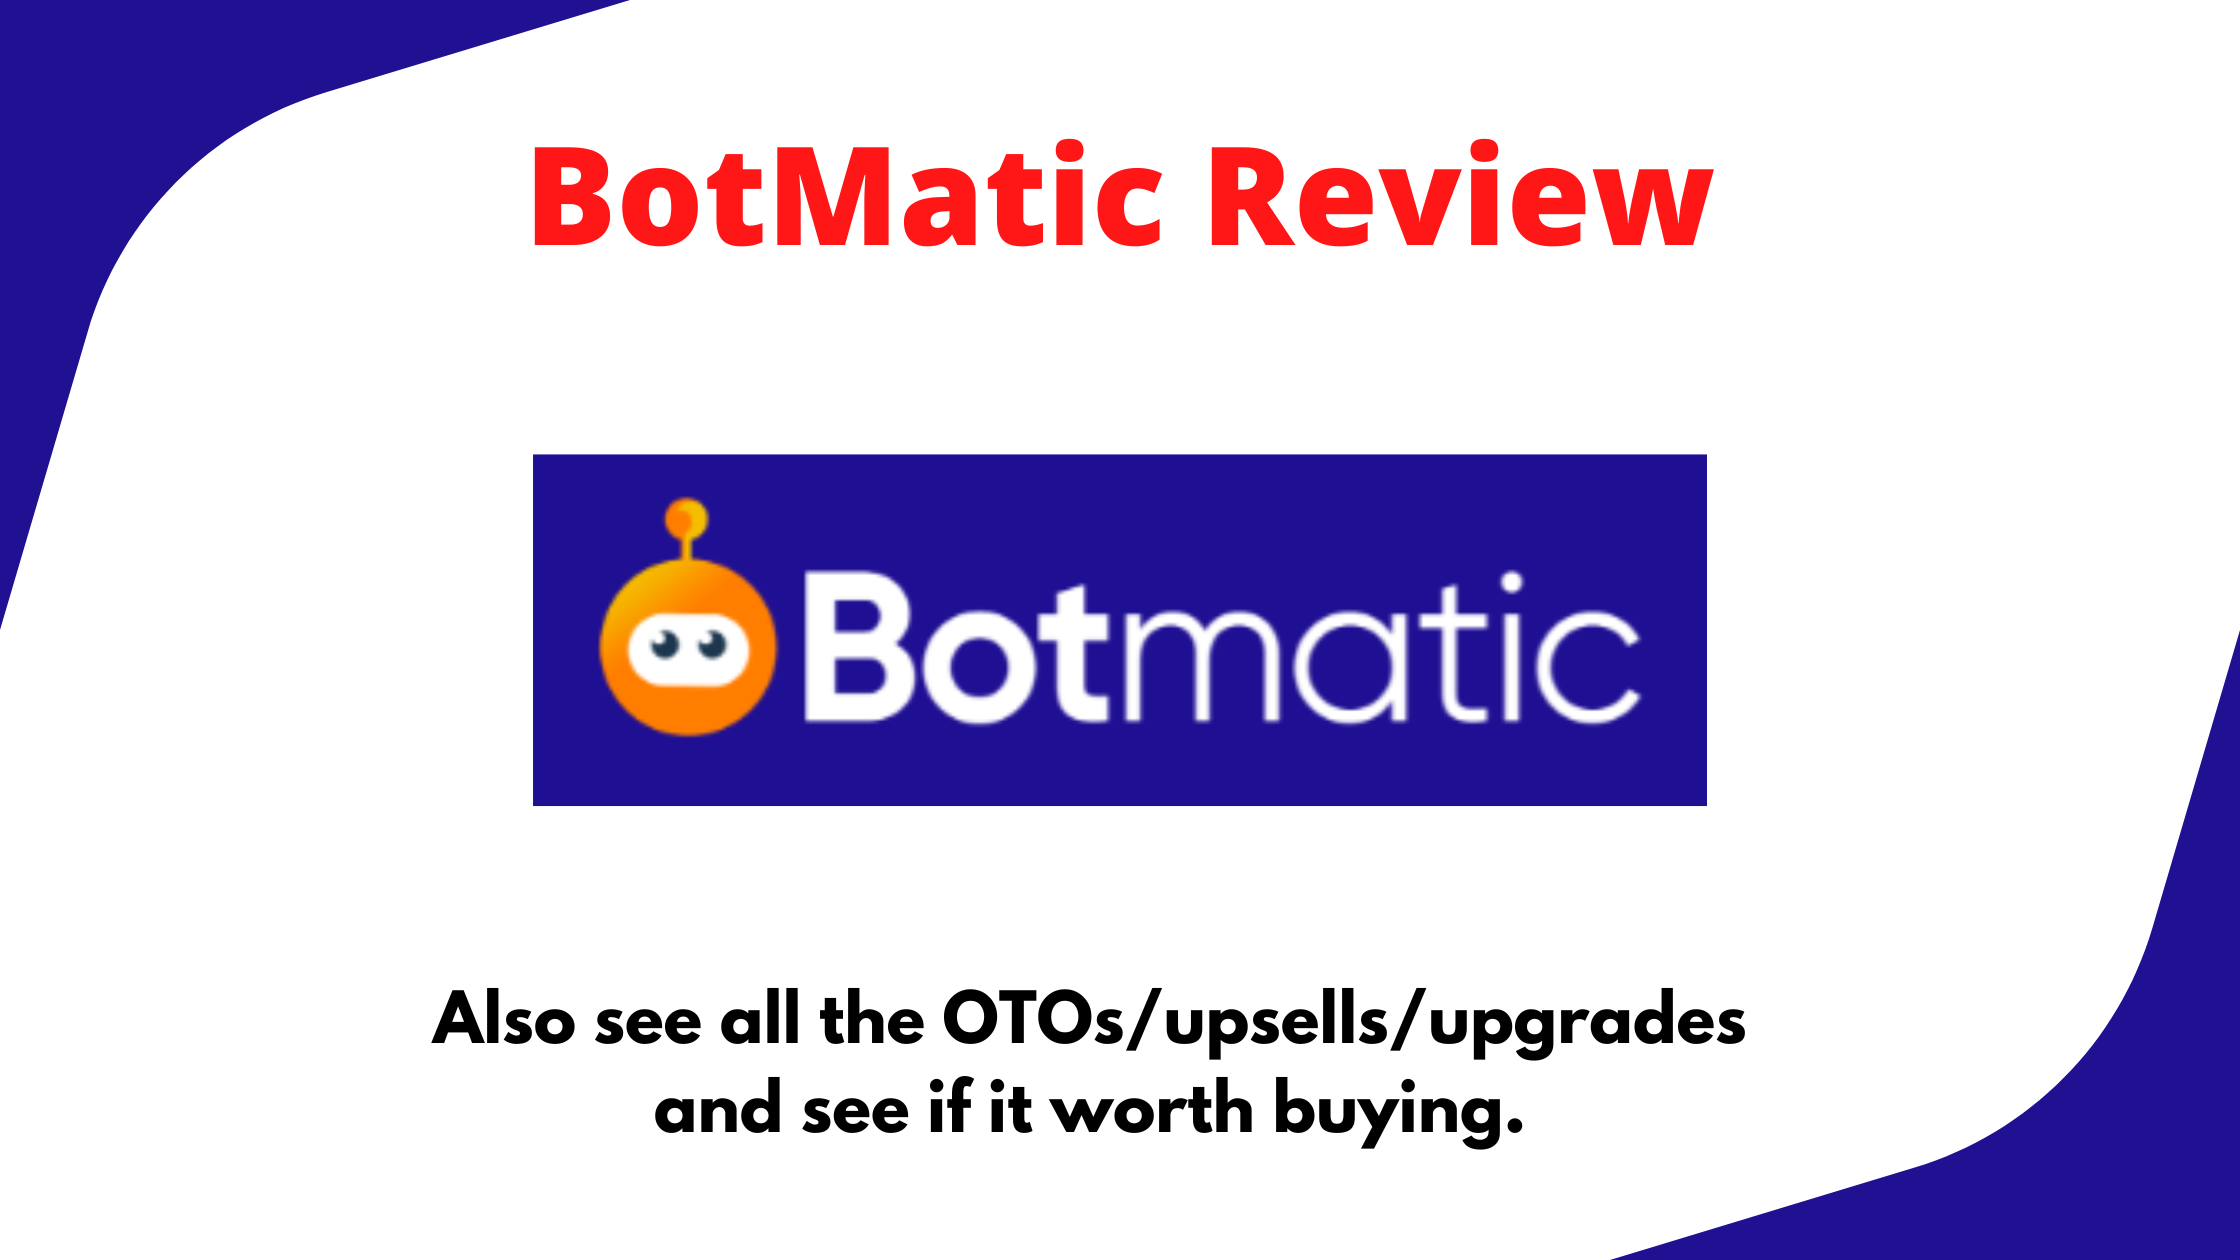 BotMatic Review